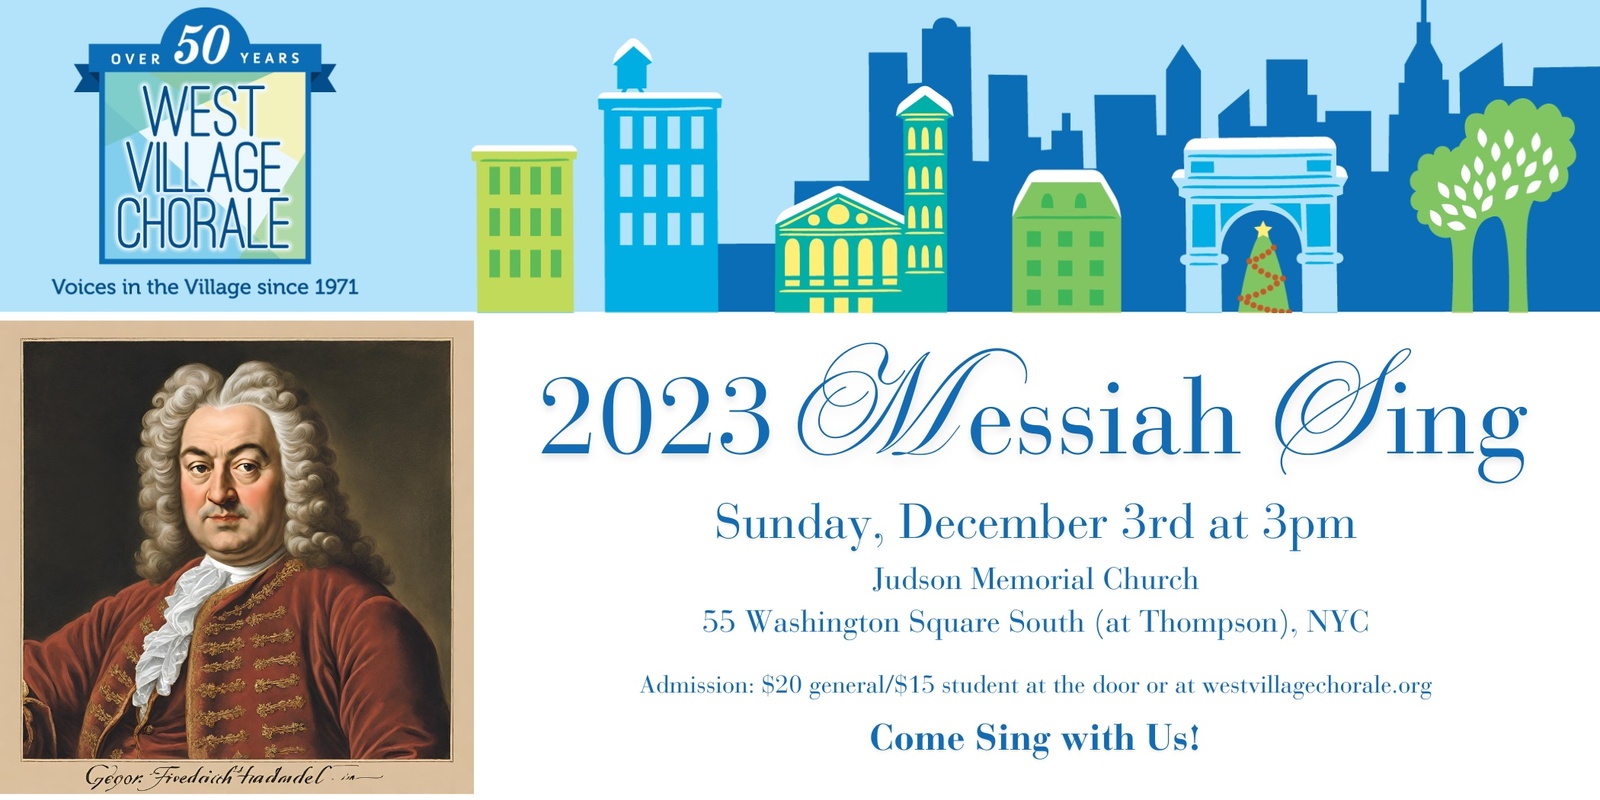 Banner image for West Village Chorale 2023 "Messiah" Sing